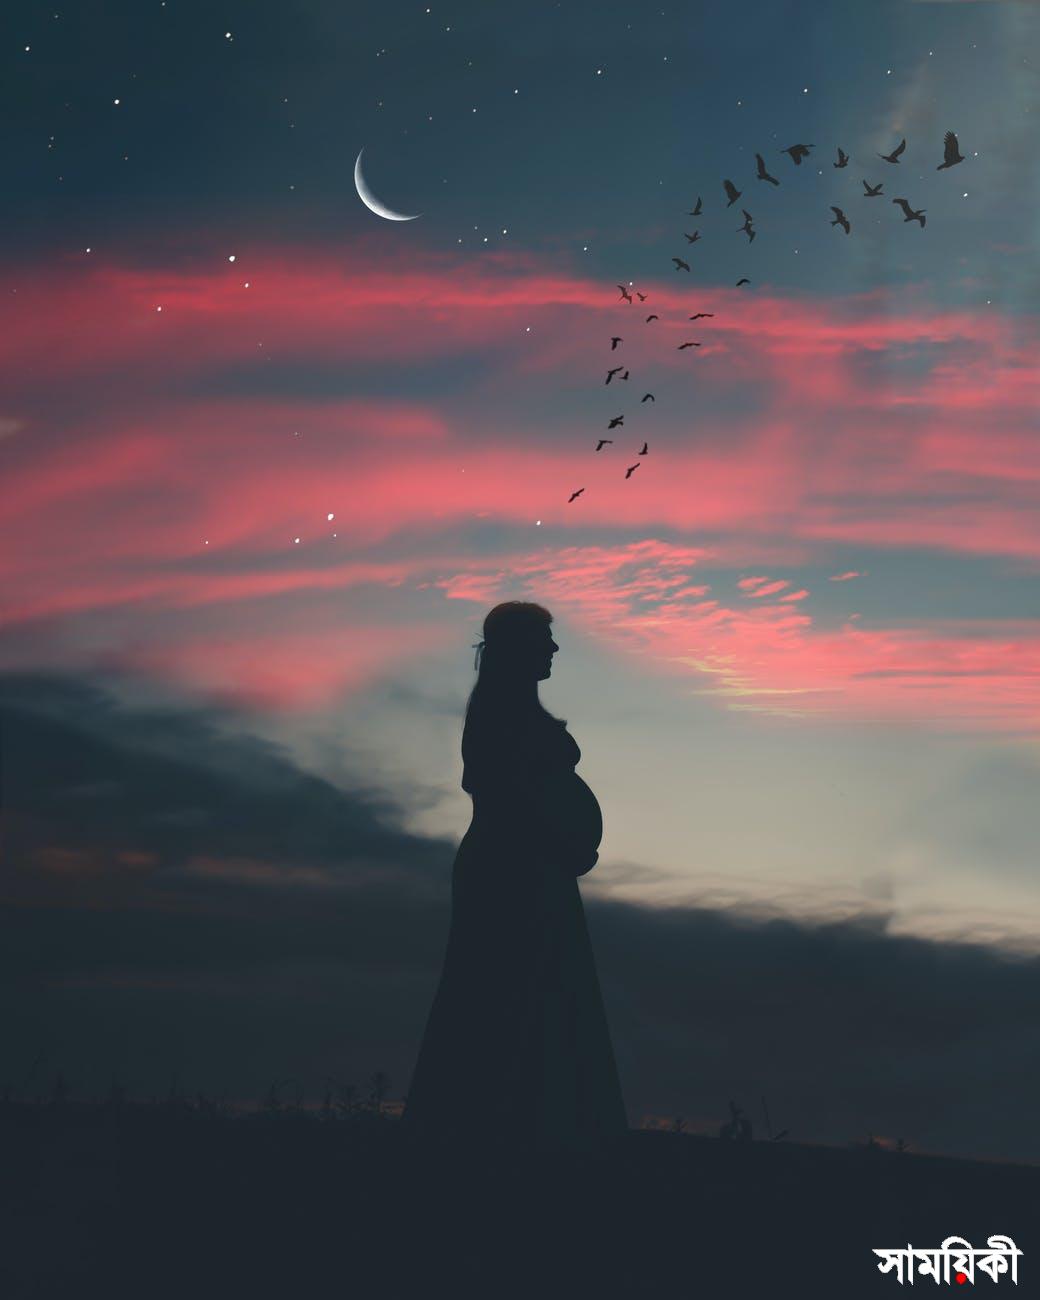 pregnant woman under cloudy sky in silhouette photography